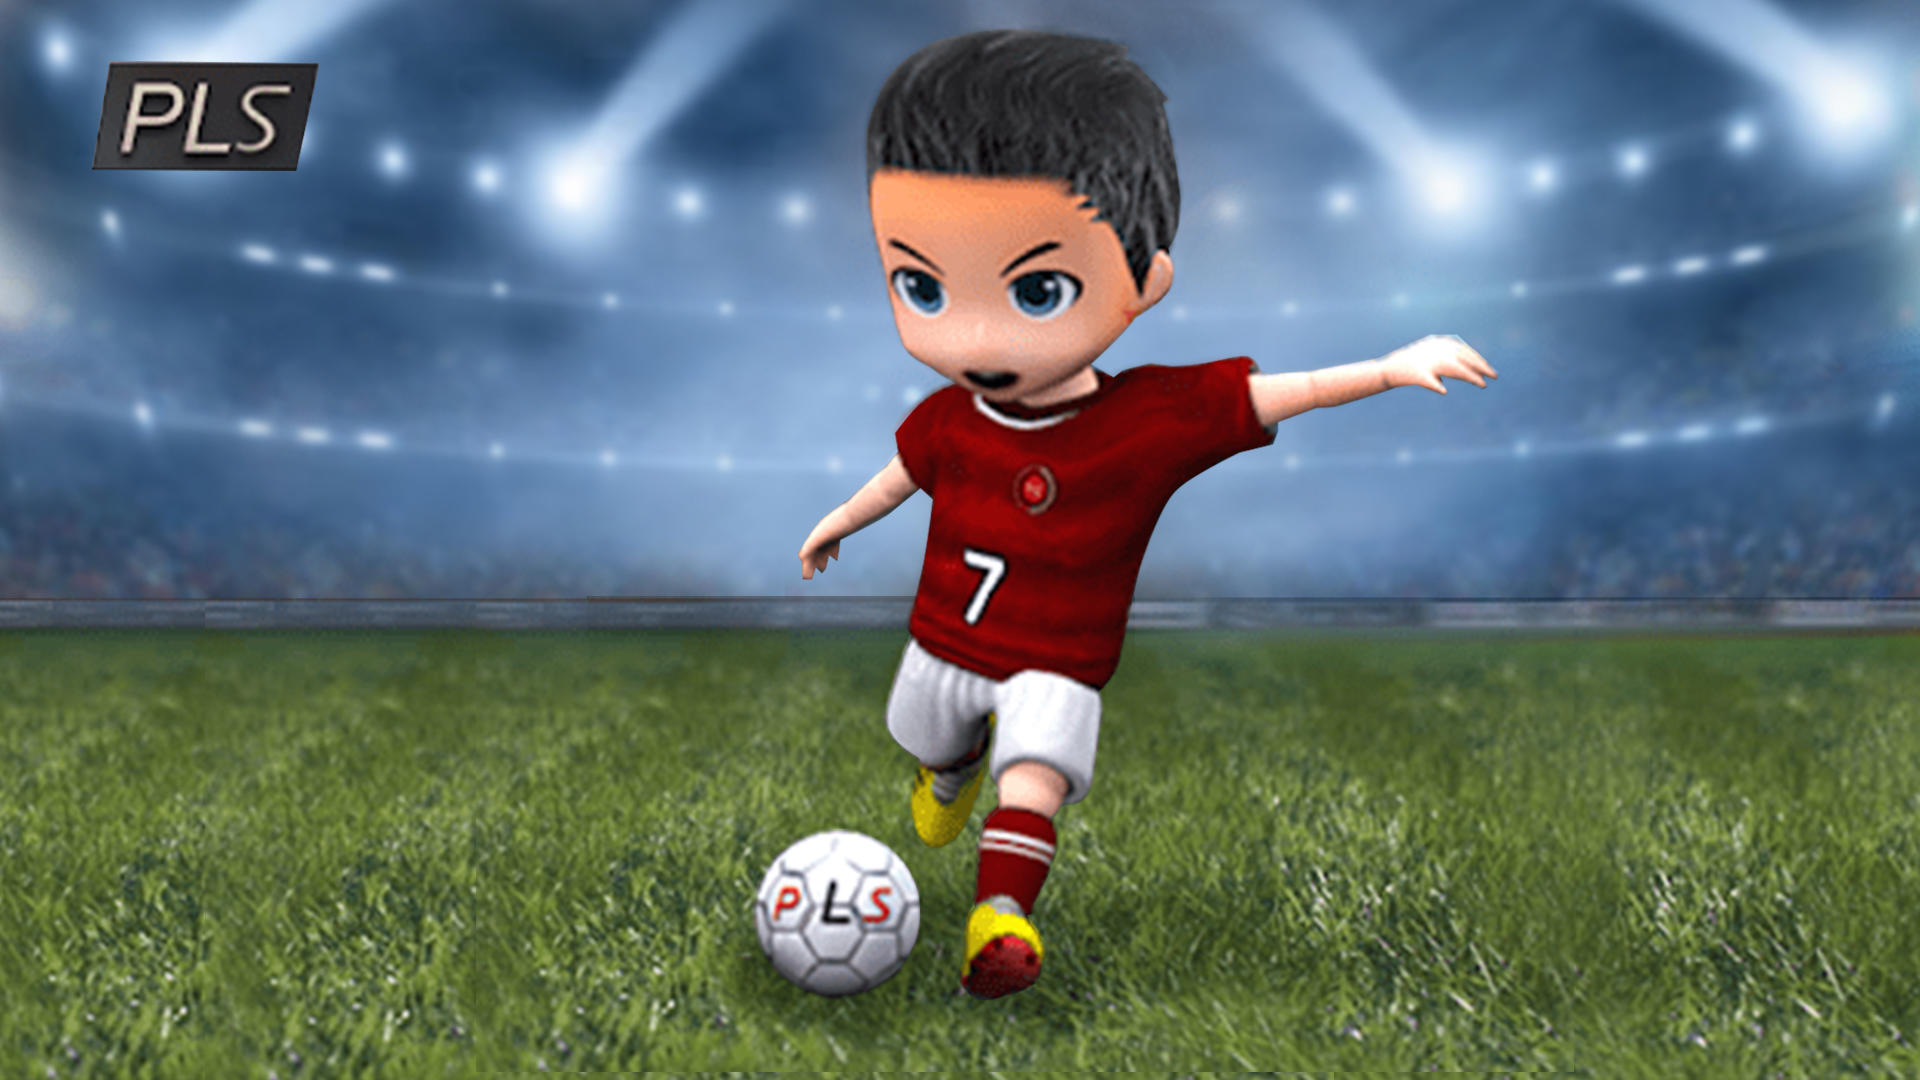 Dream League Soccer Kits Pro APK for Android Download